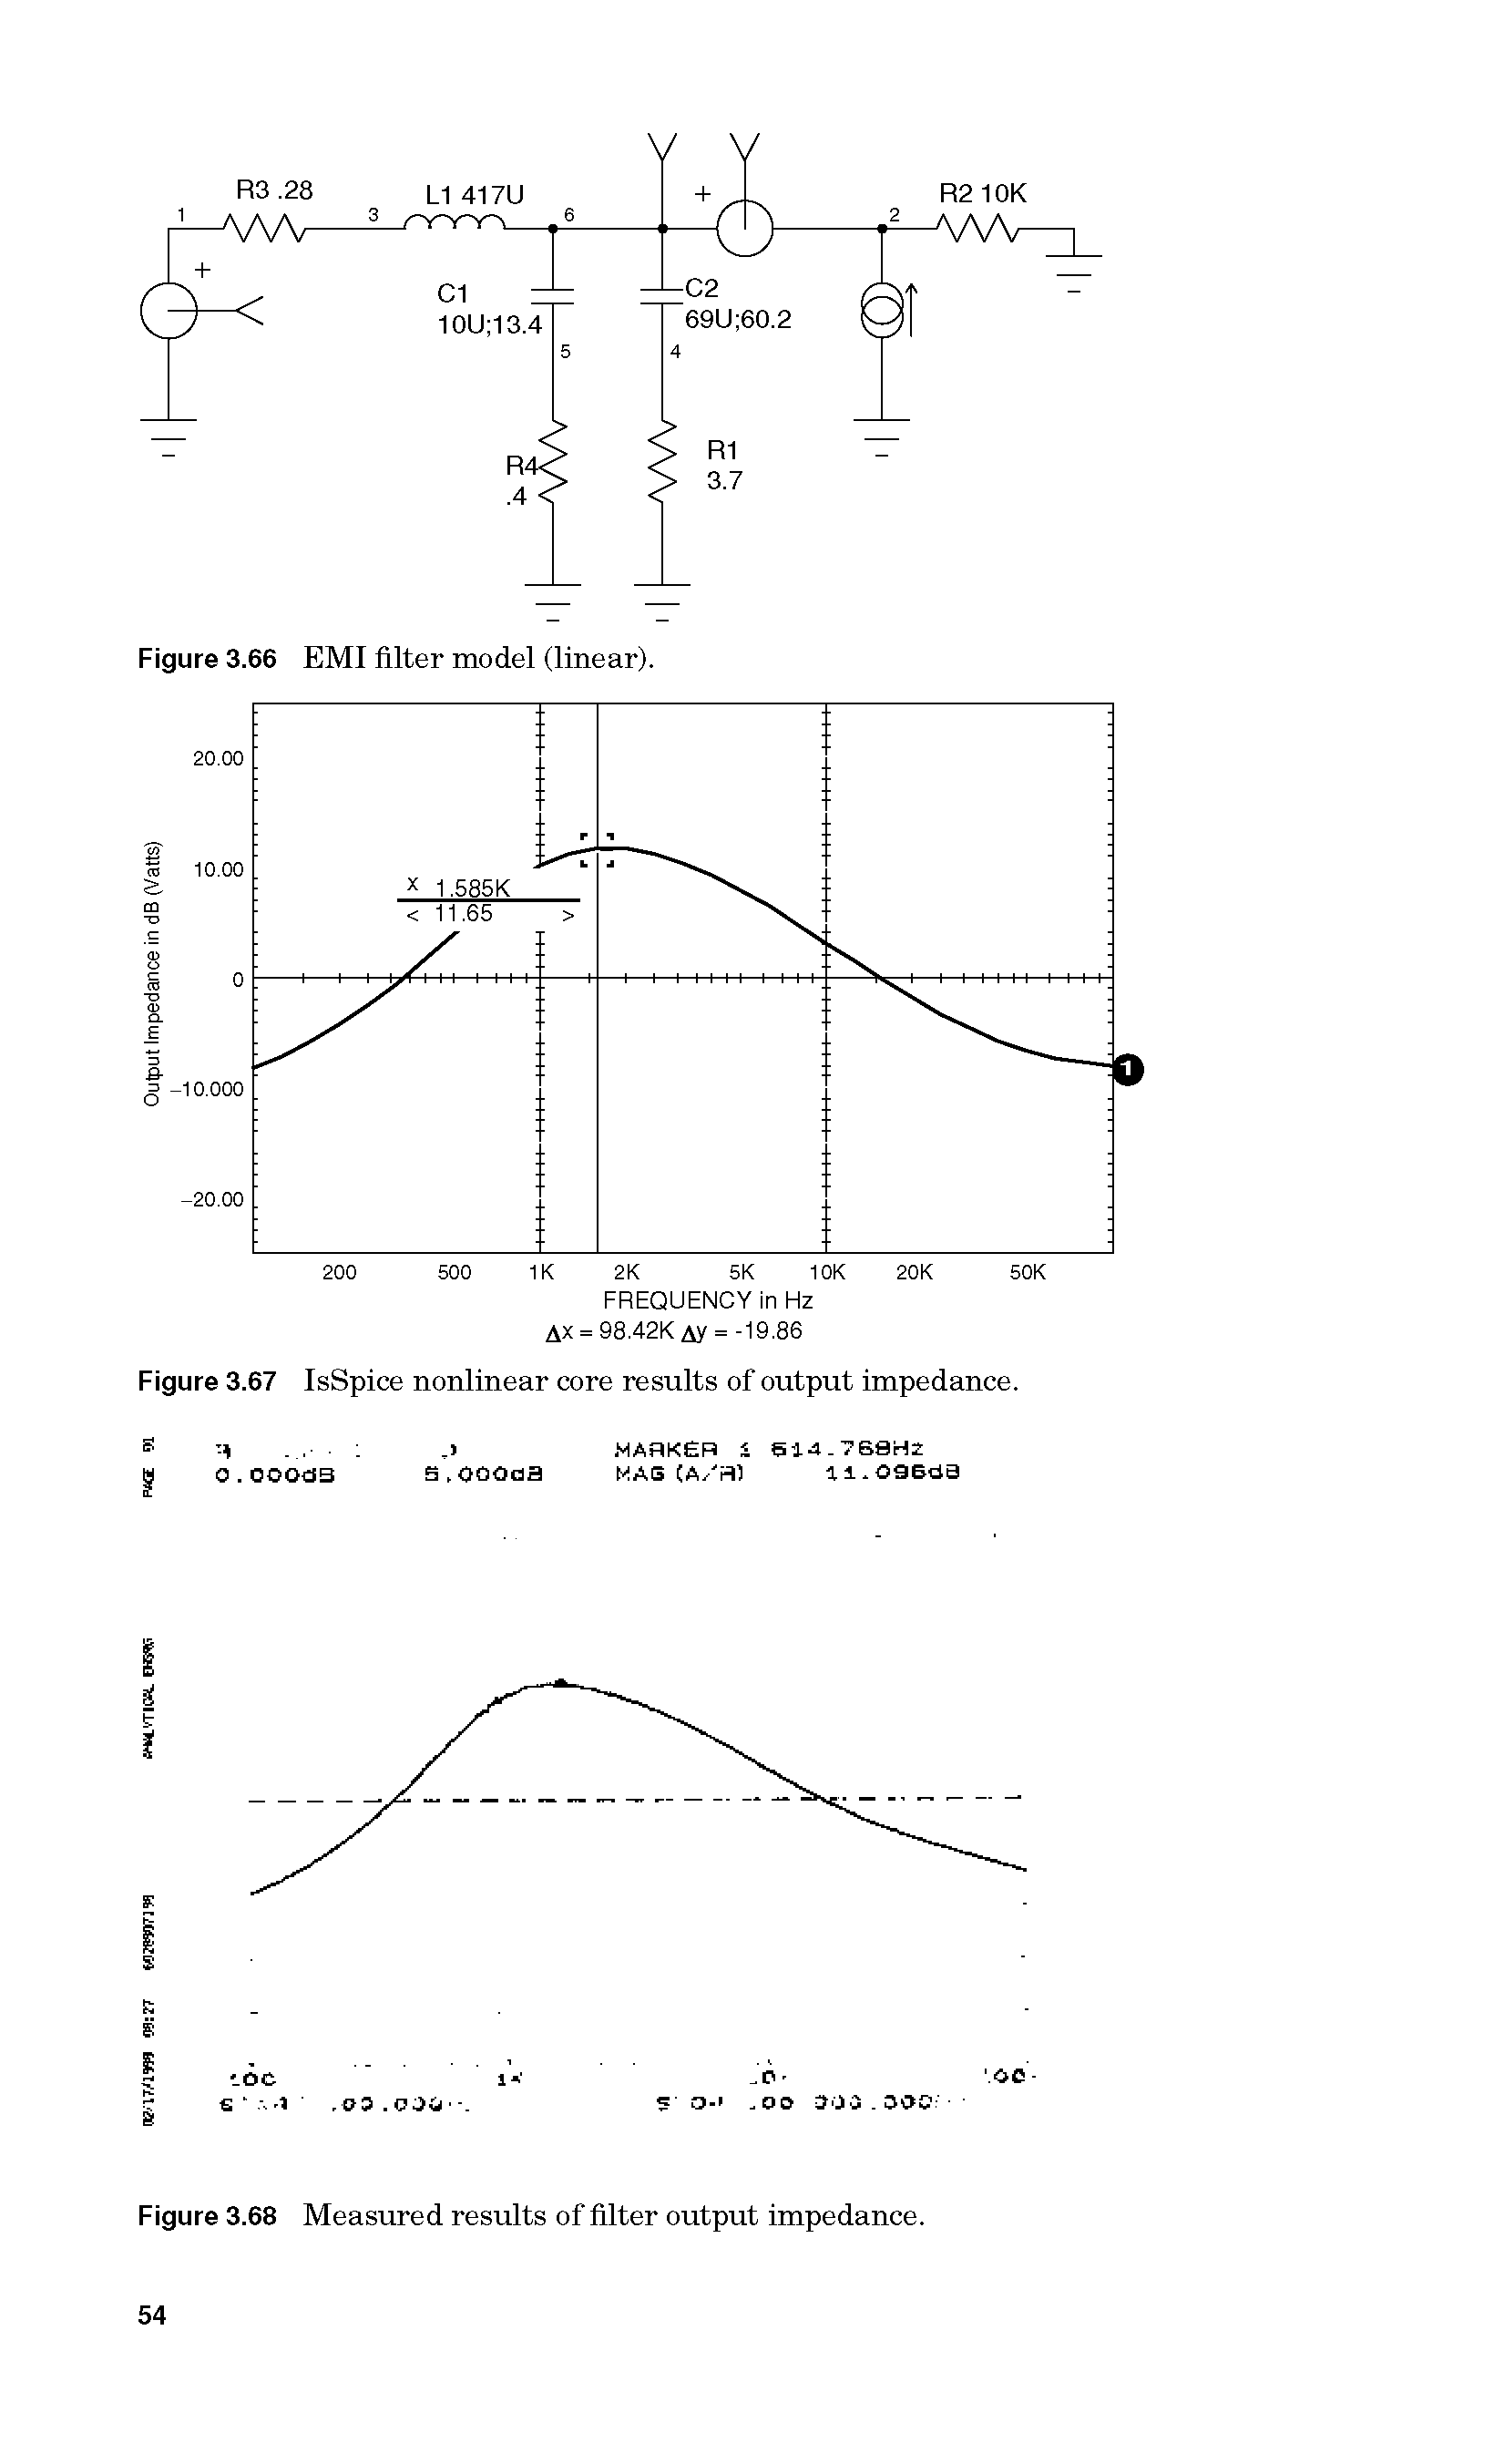 Figure 3.67 IsSpice nonlinear core results of output impedance.